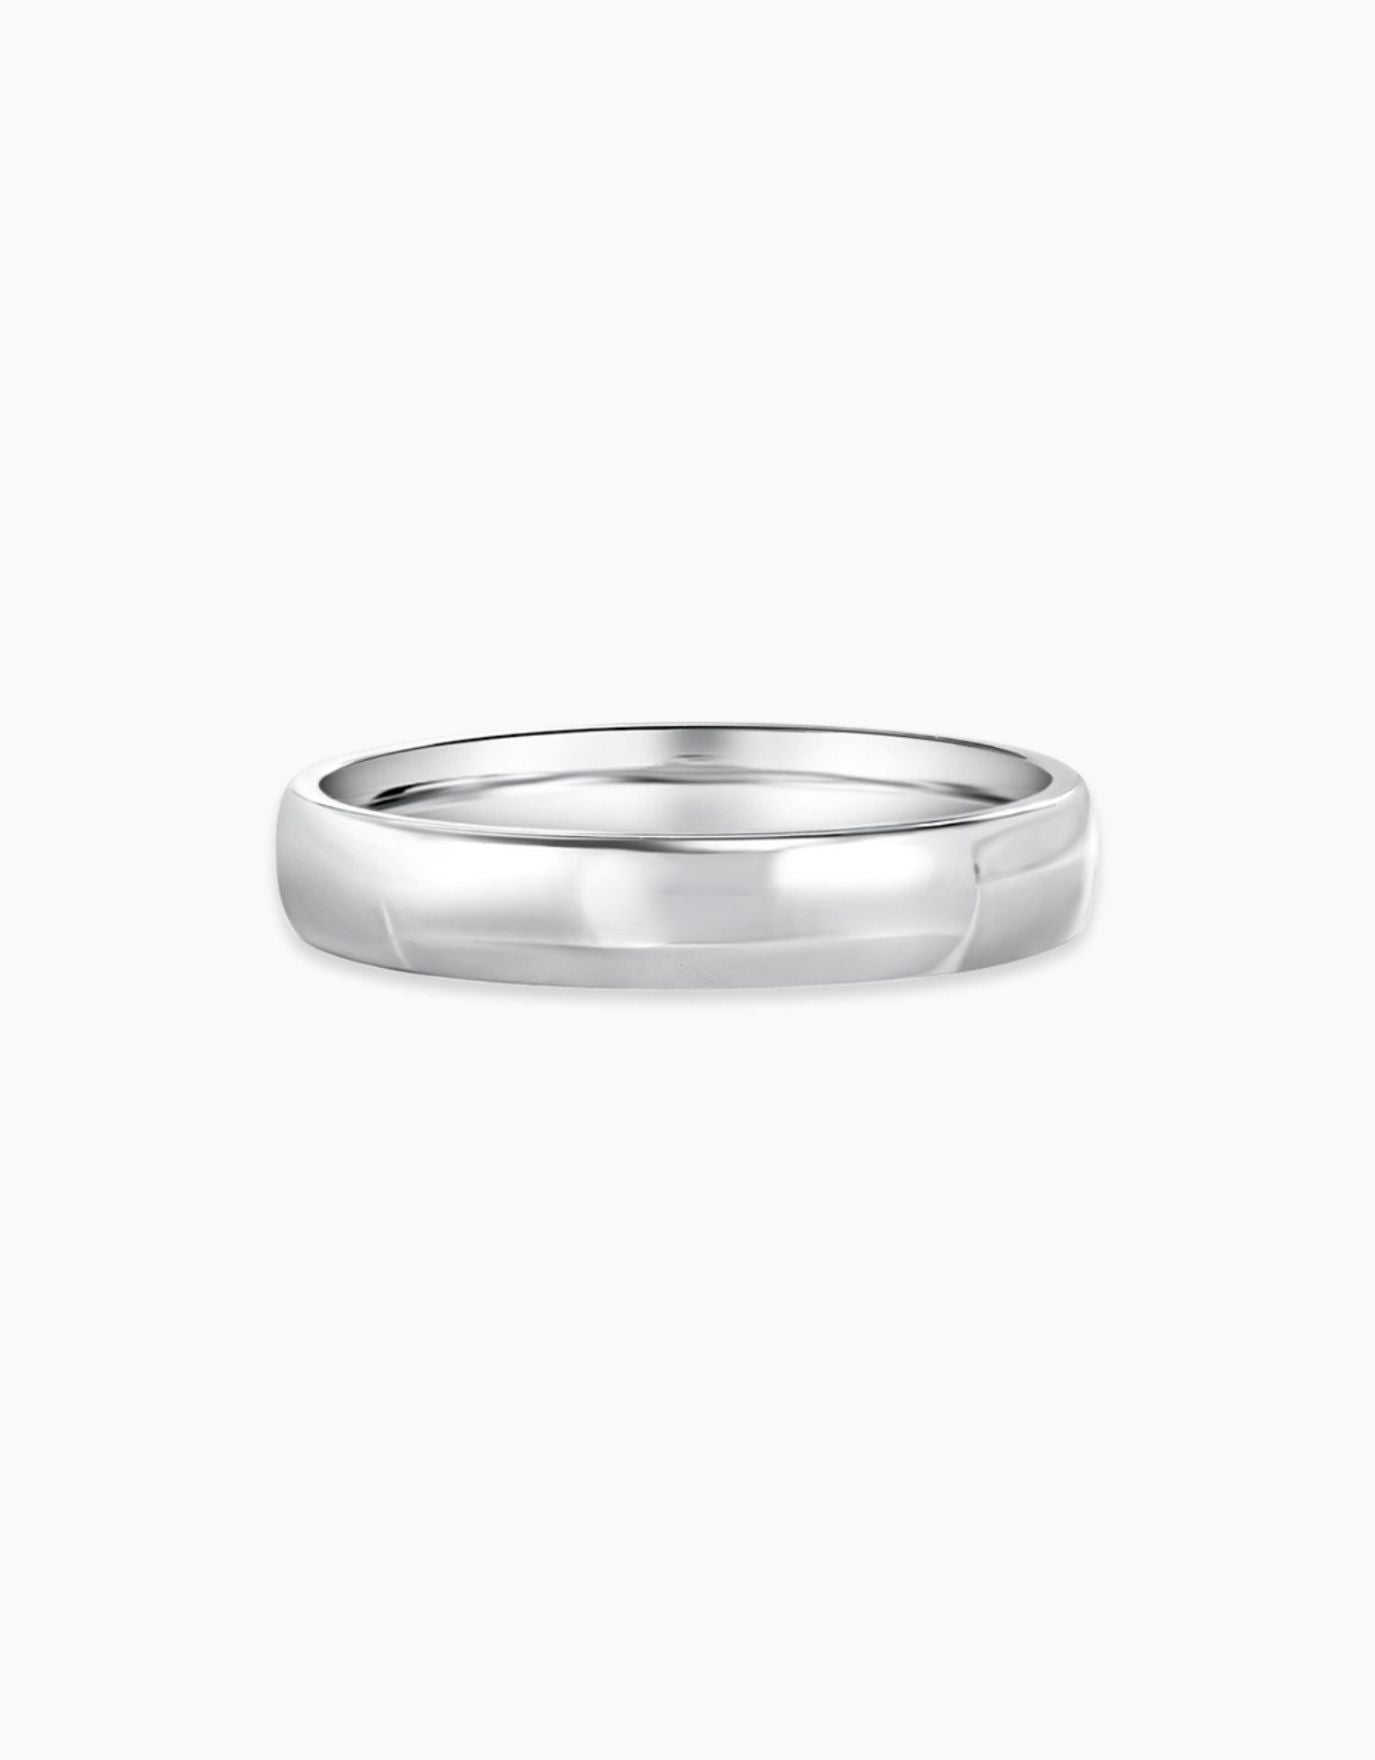 LVC Classique wedding band with a glossy finish